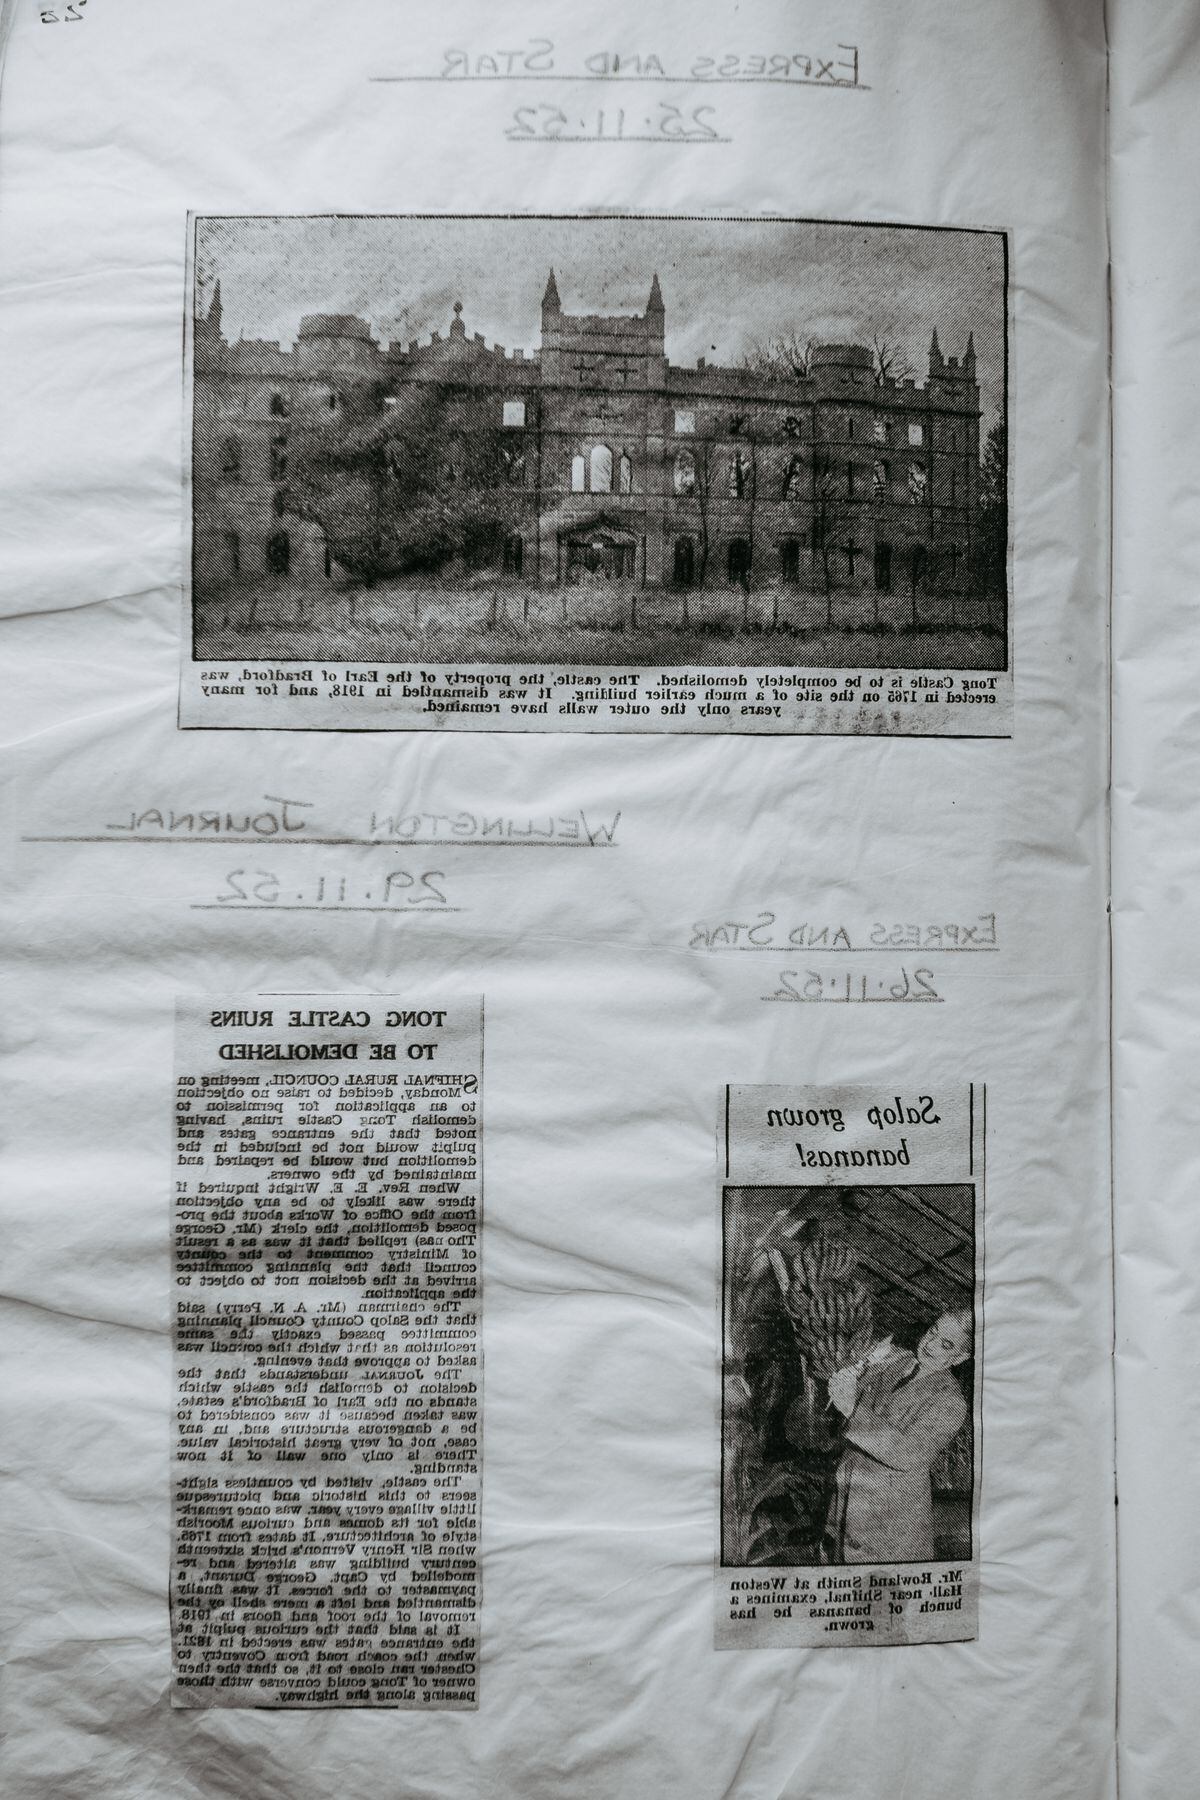 The Bridgeman family has a detailed archive relating to the history of the Bradford Estate